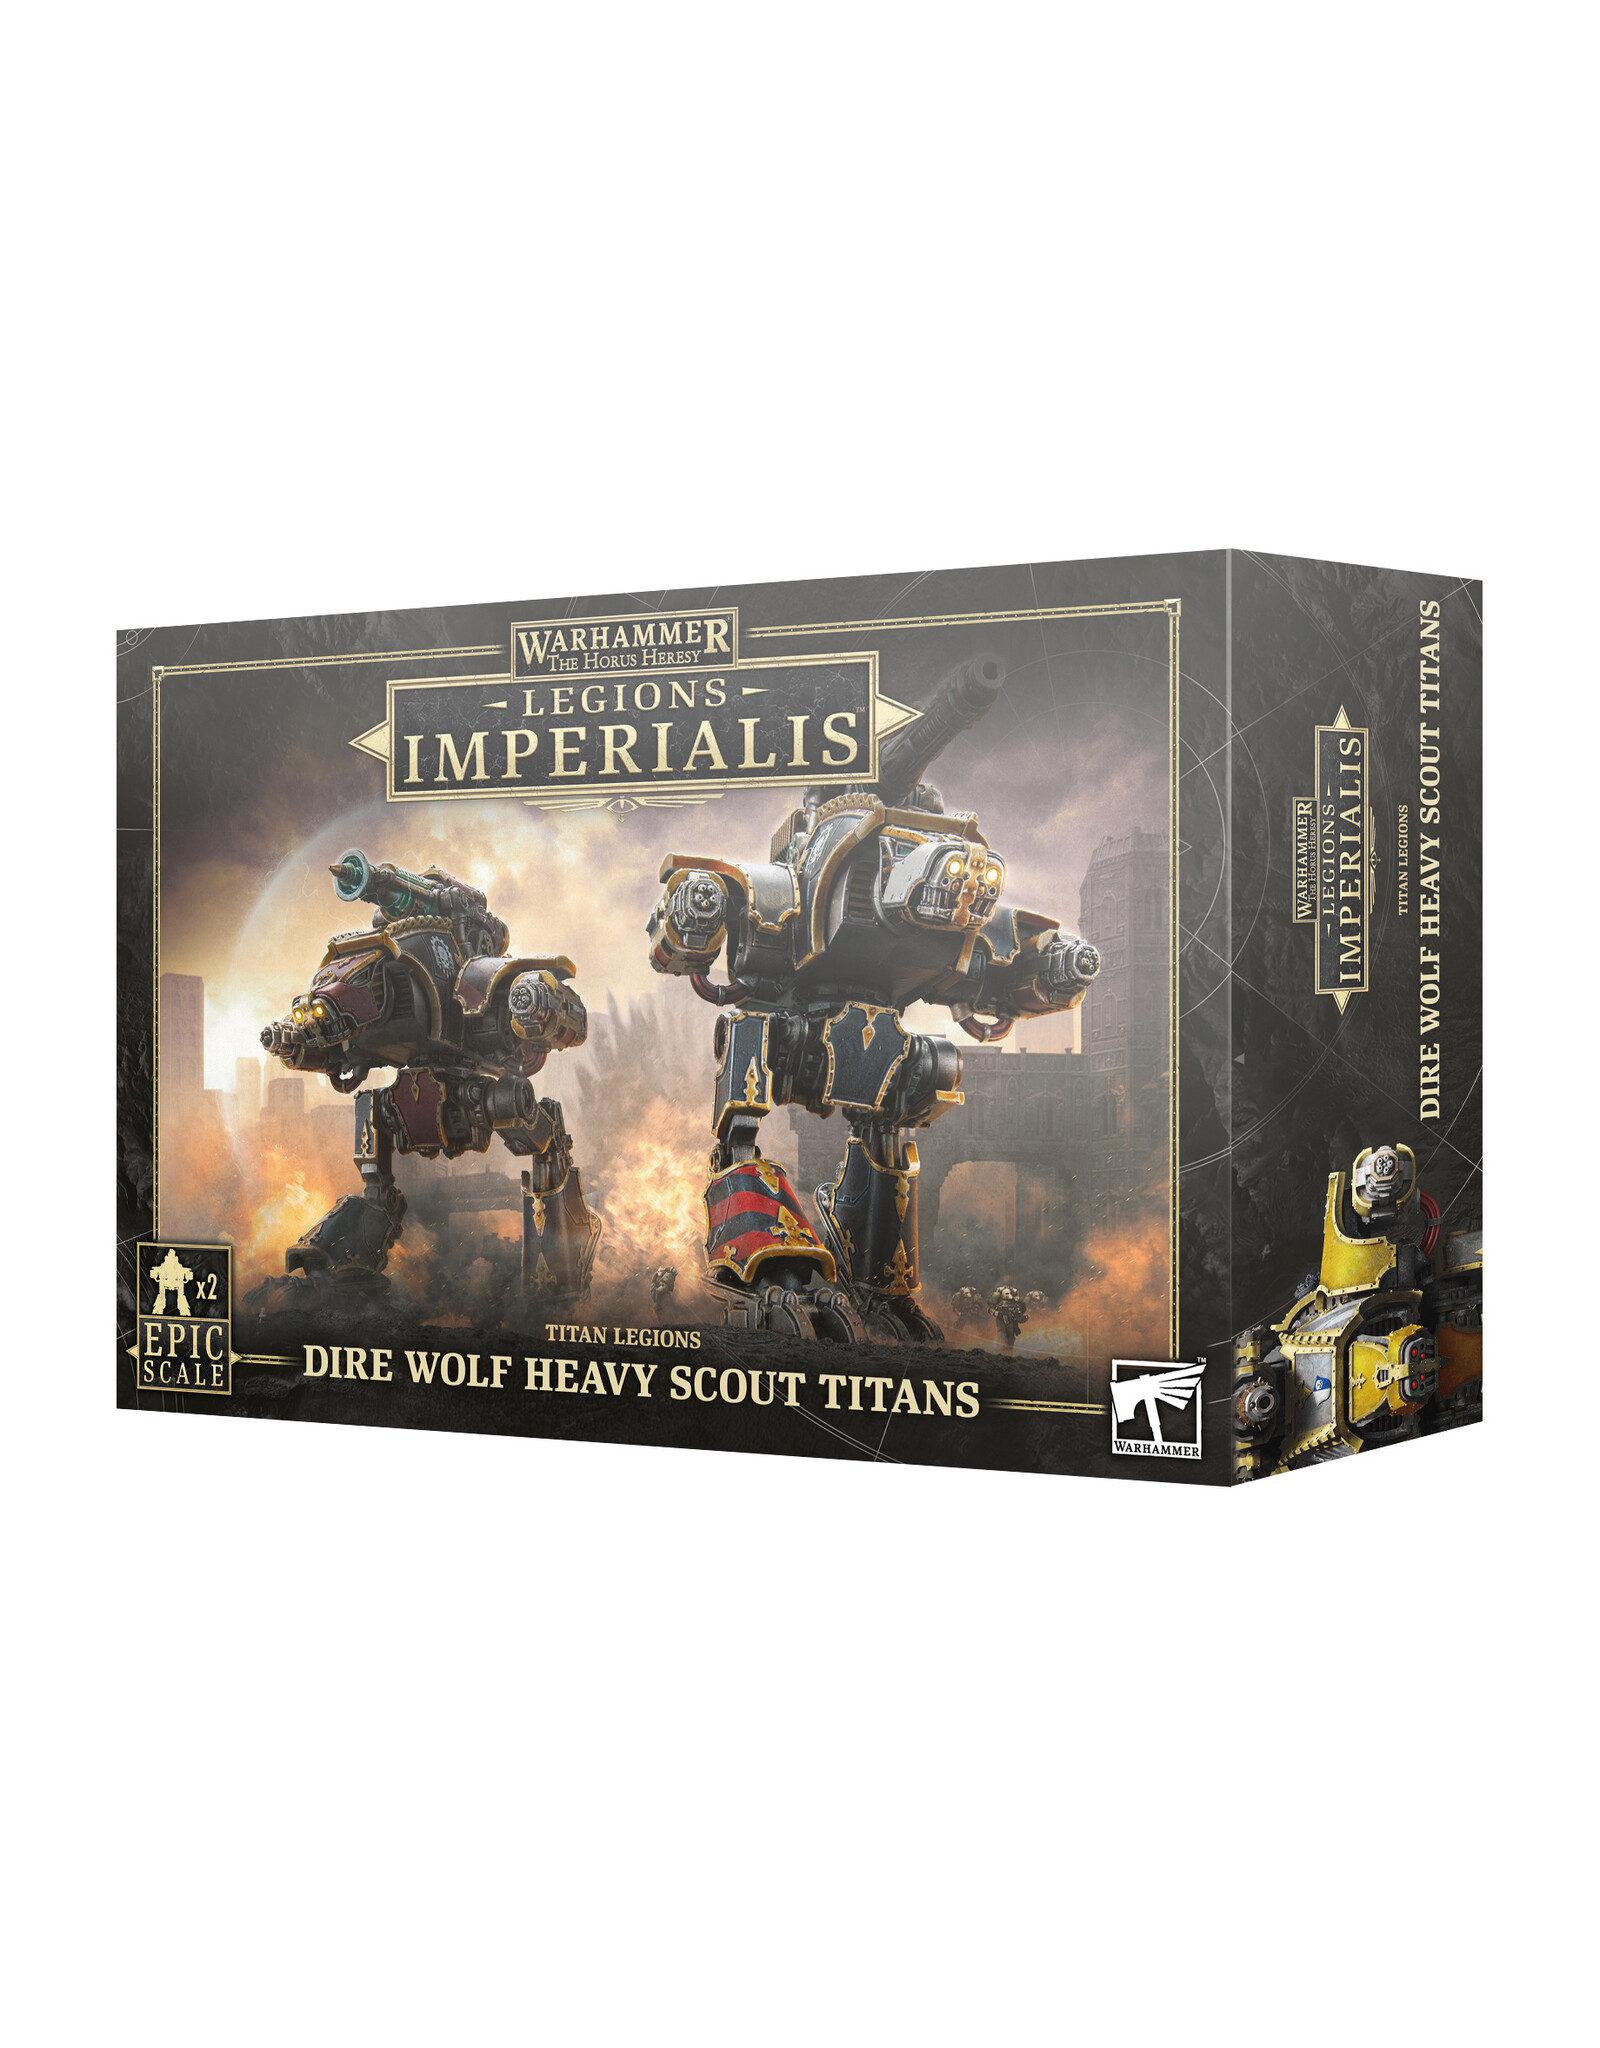 Horus Heresy Legions Imperialis: Dire Wolf Heavy Scout Titans